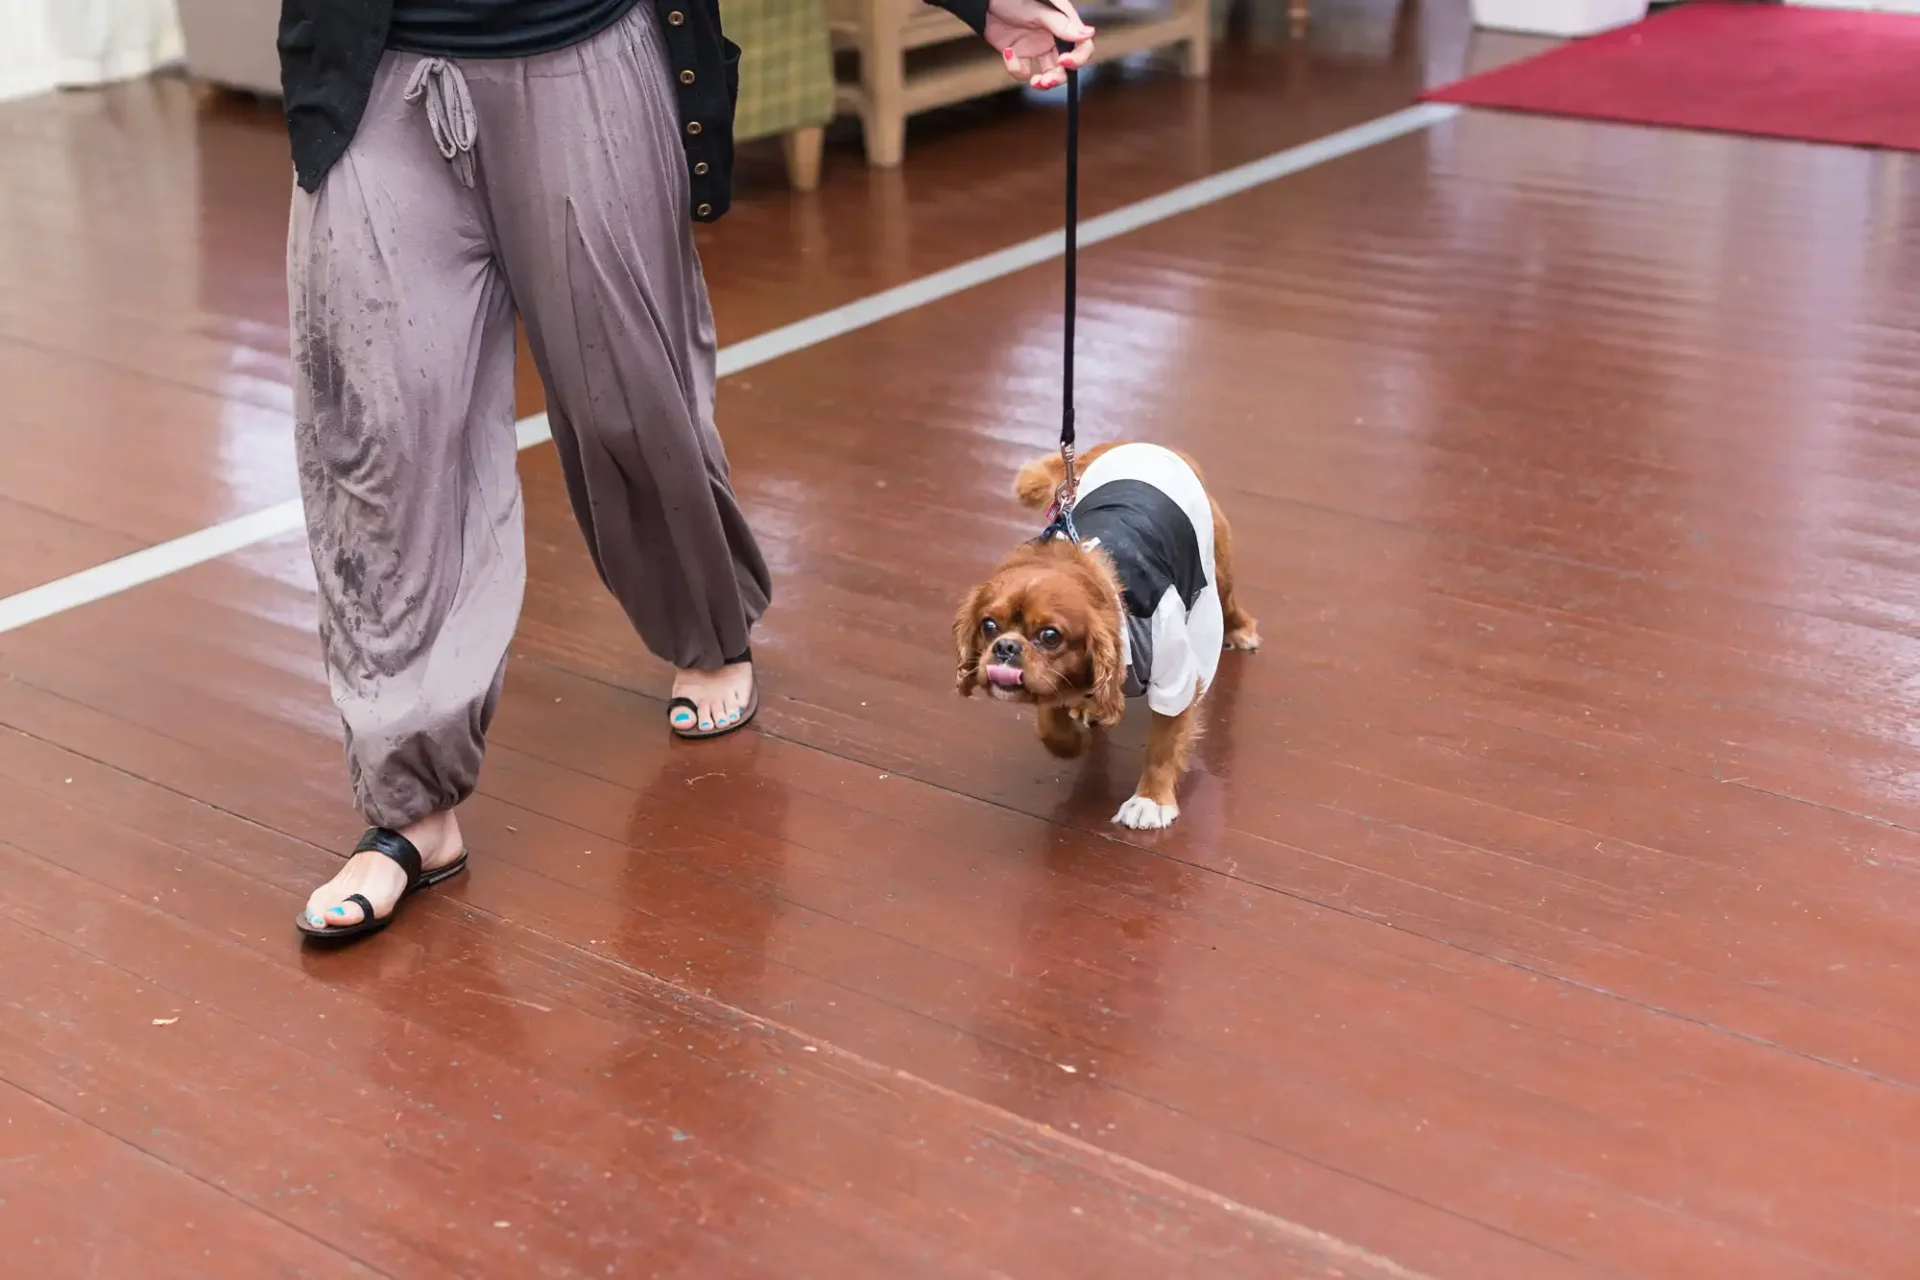 A small dog in a shirt and harness walks on a leash held by a person wearing gray pants and black sandals indoors.